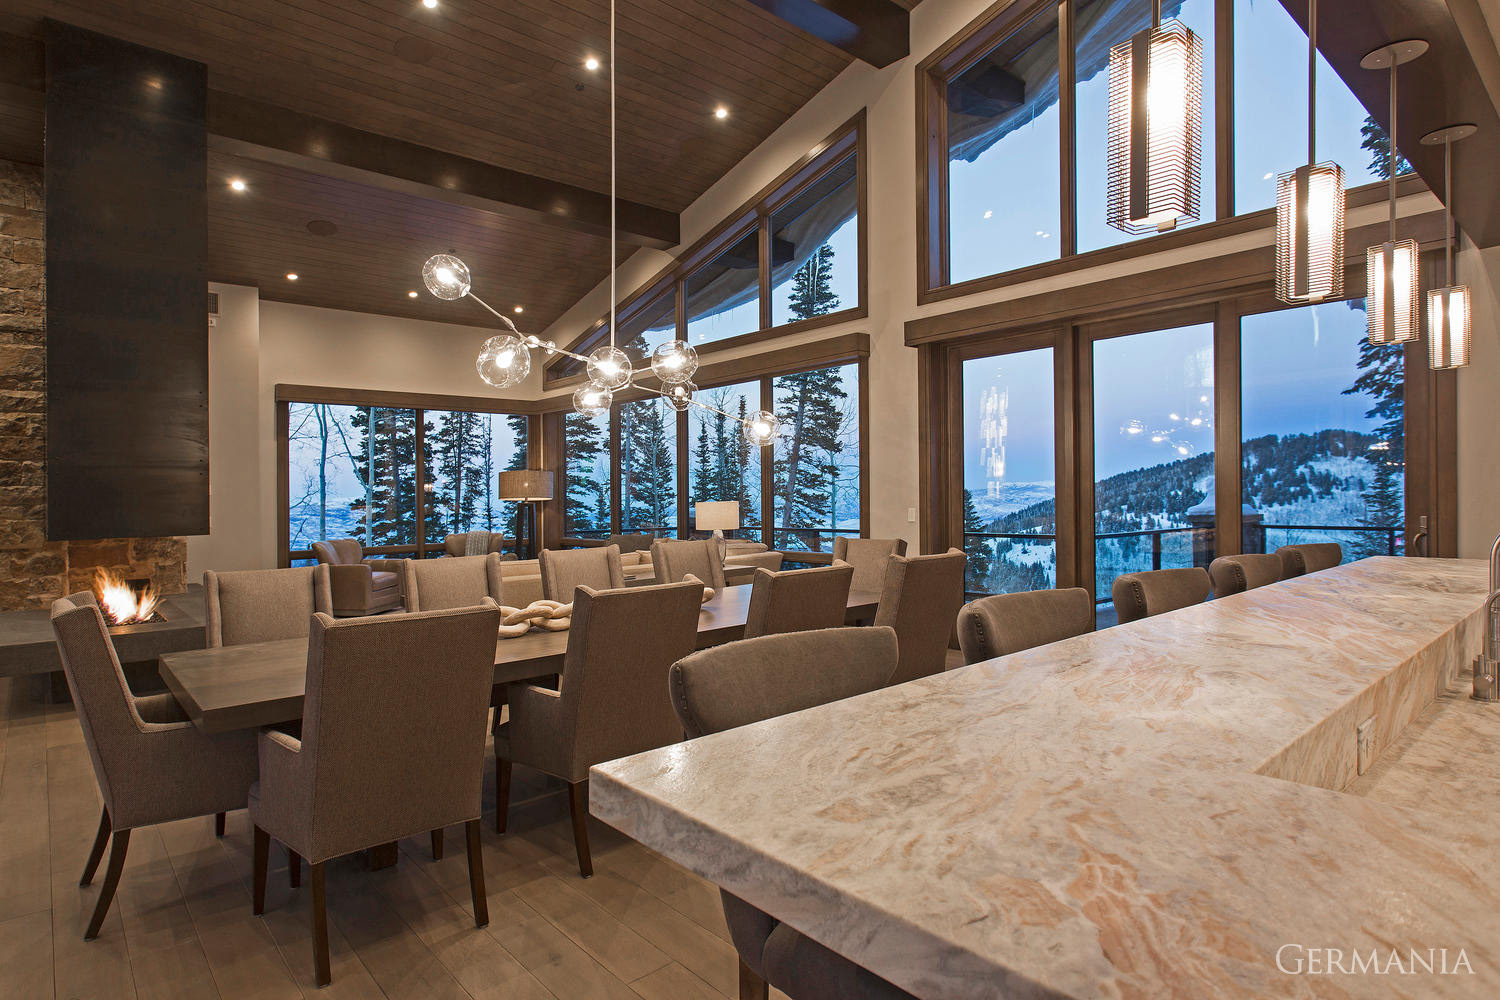 This is what you want in a vacation home dining room. Stone slab countertops and tongue and groove ceilings and that amazing mountain living view!